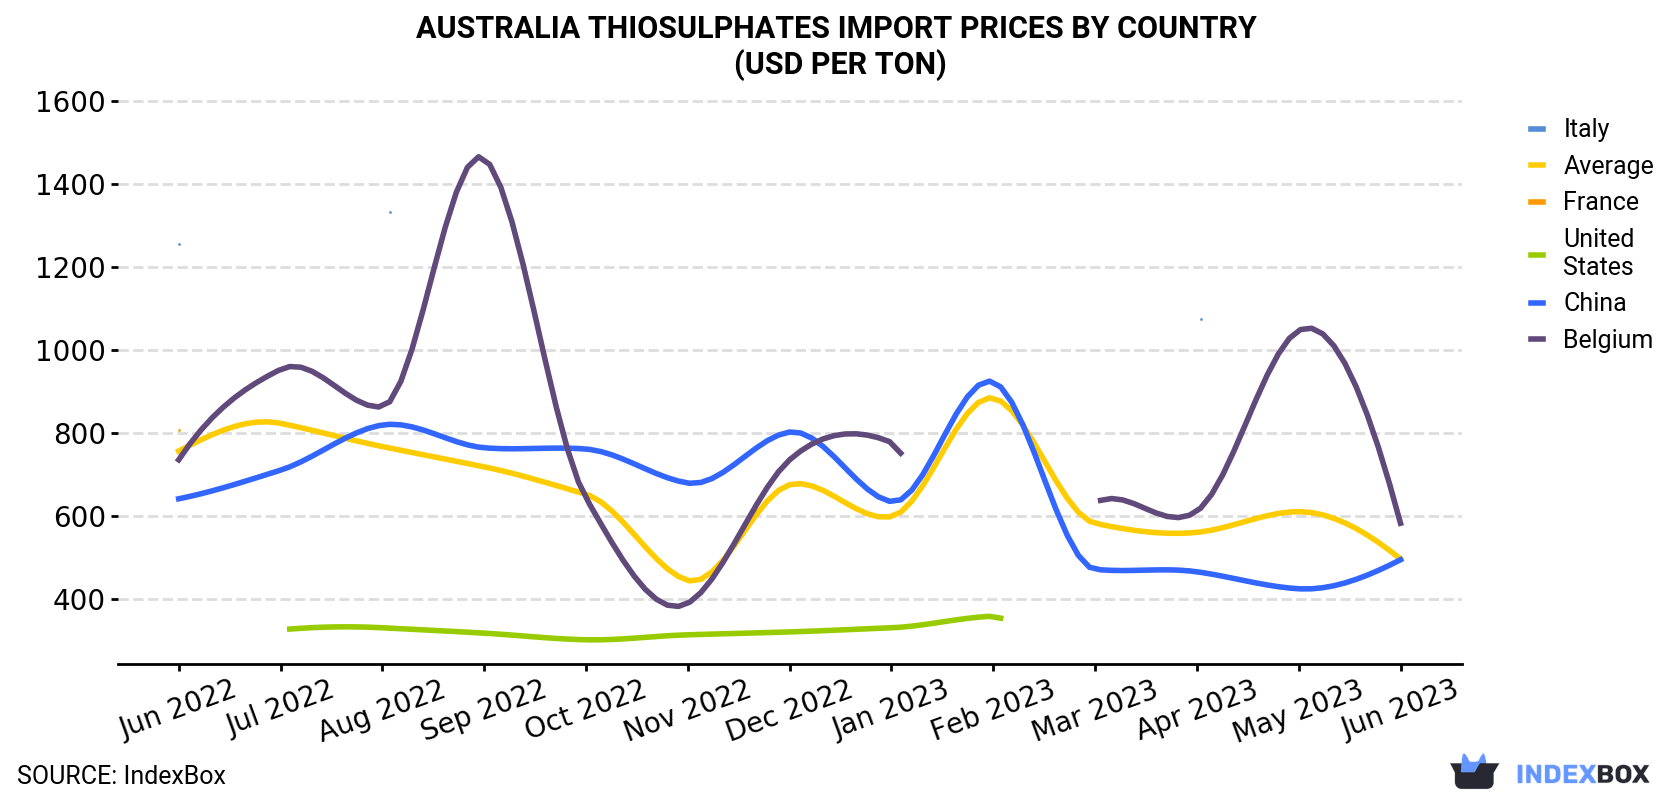 Australia Thiosulphates Import Prices By Country (USD Per Ton)